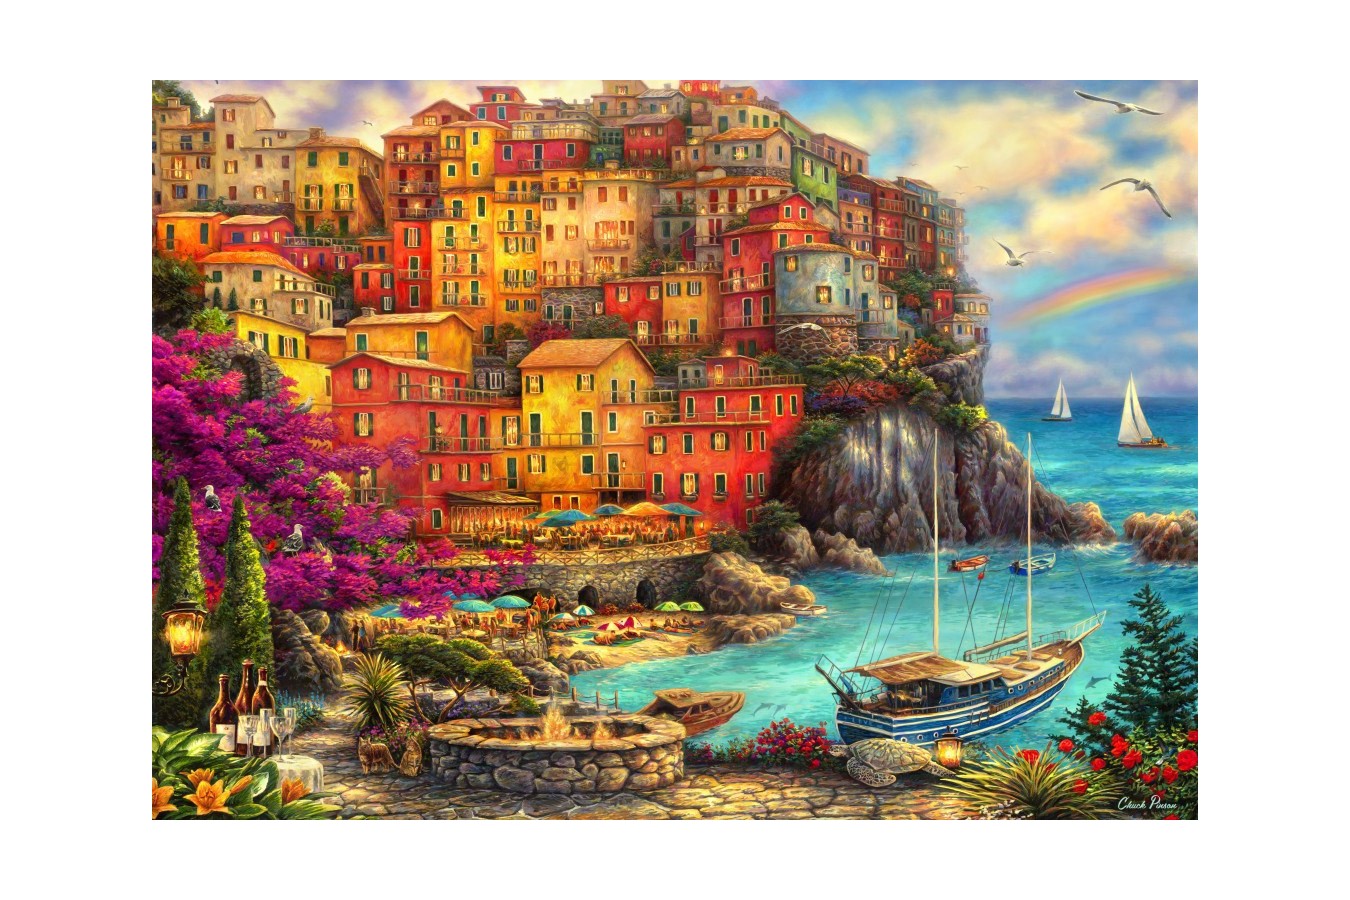 Puzzle Bluebird - Chuck Pinson: A Beautiful Day At Cinque Terre, 2000 piese (70055)